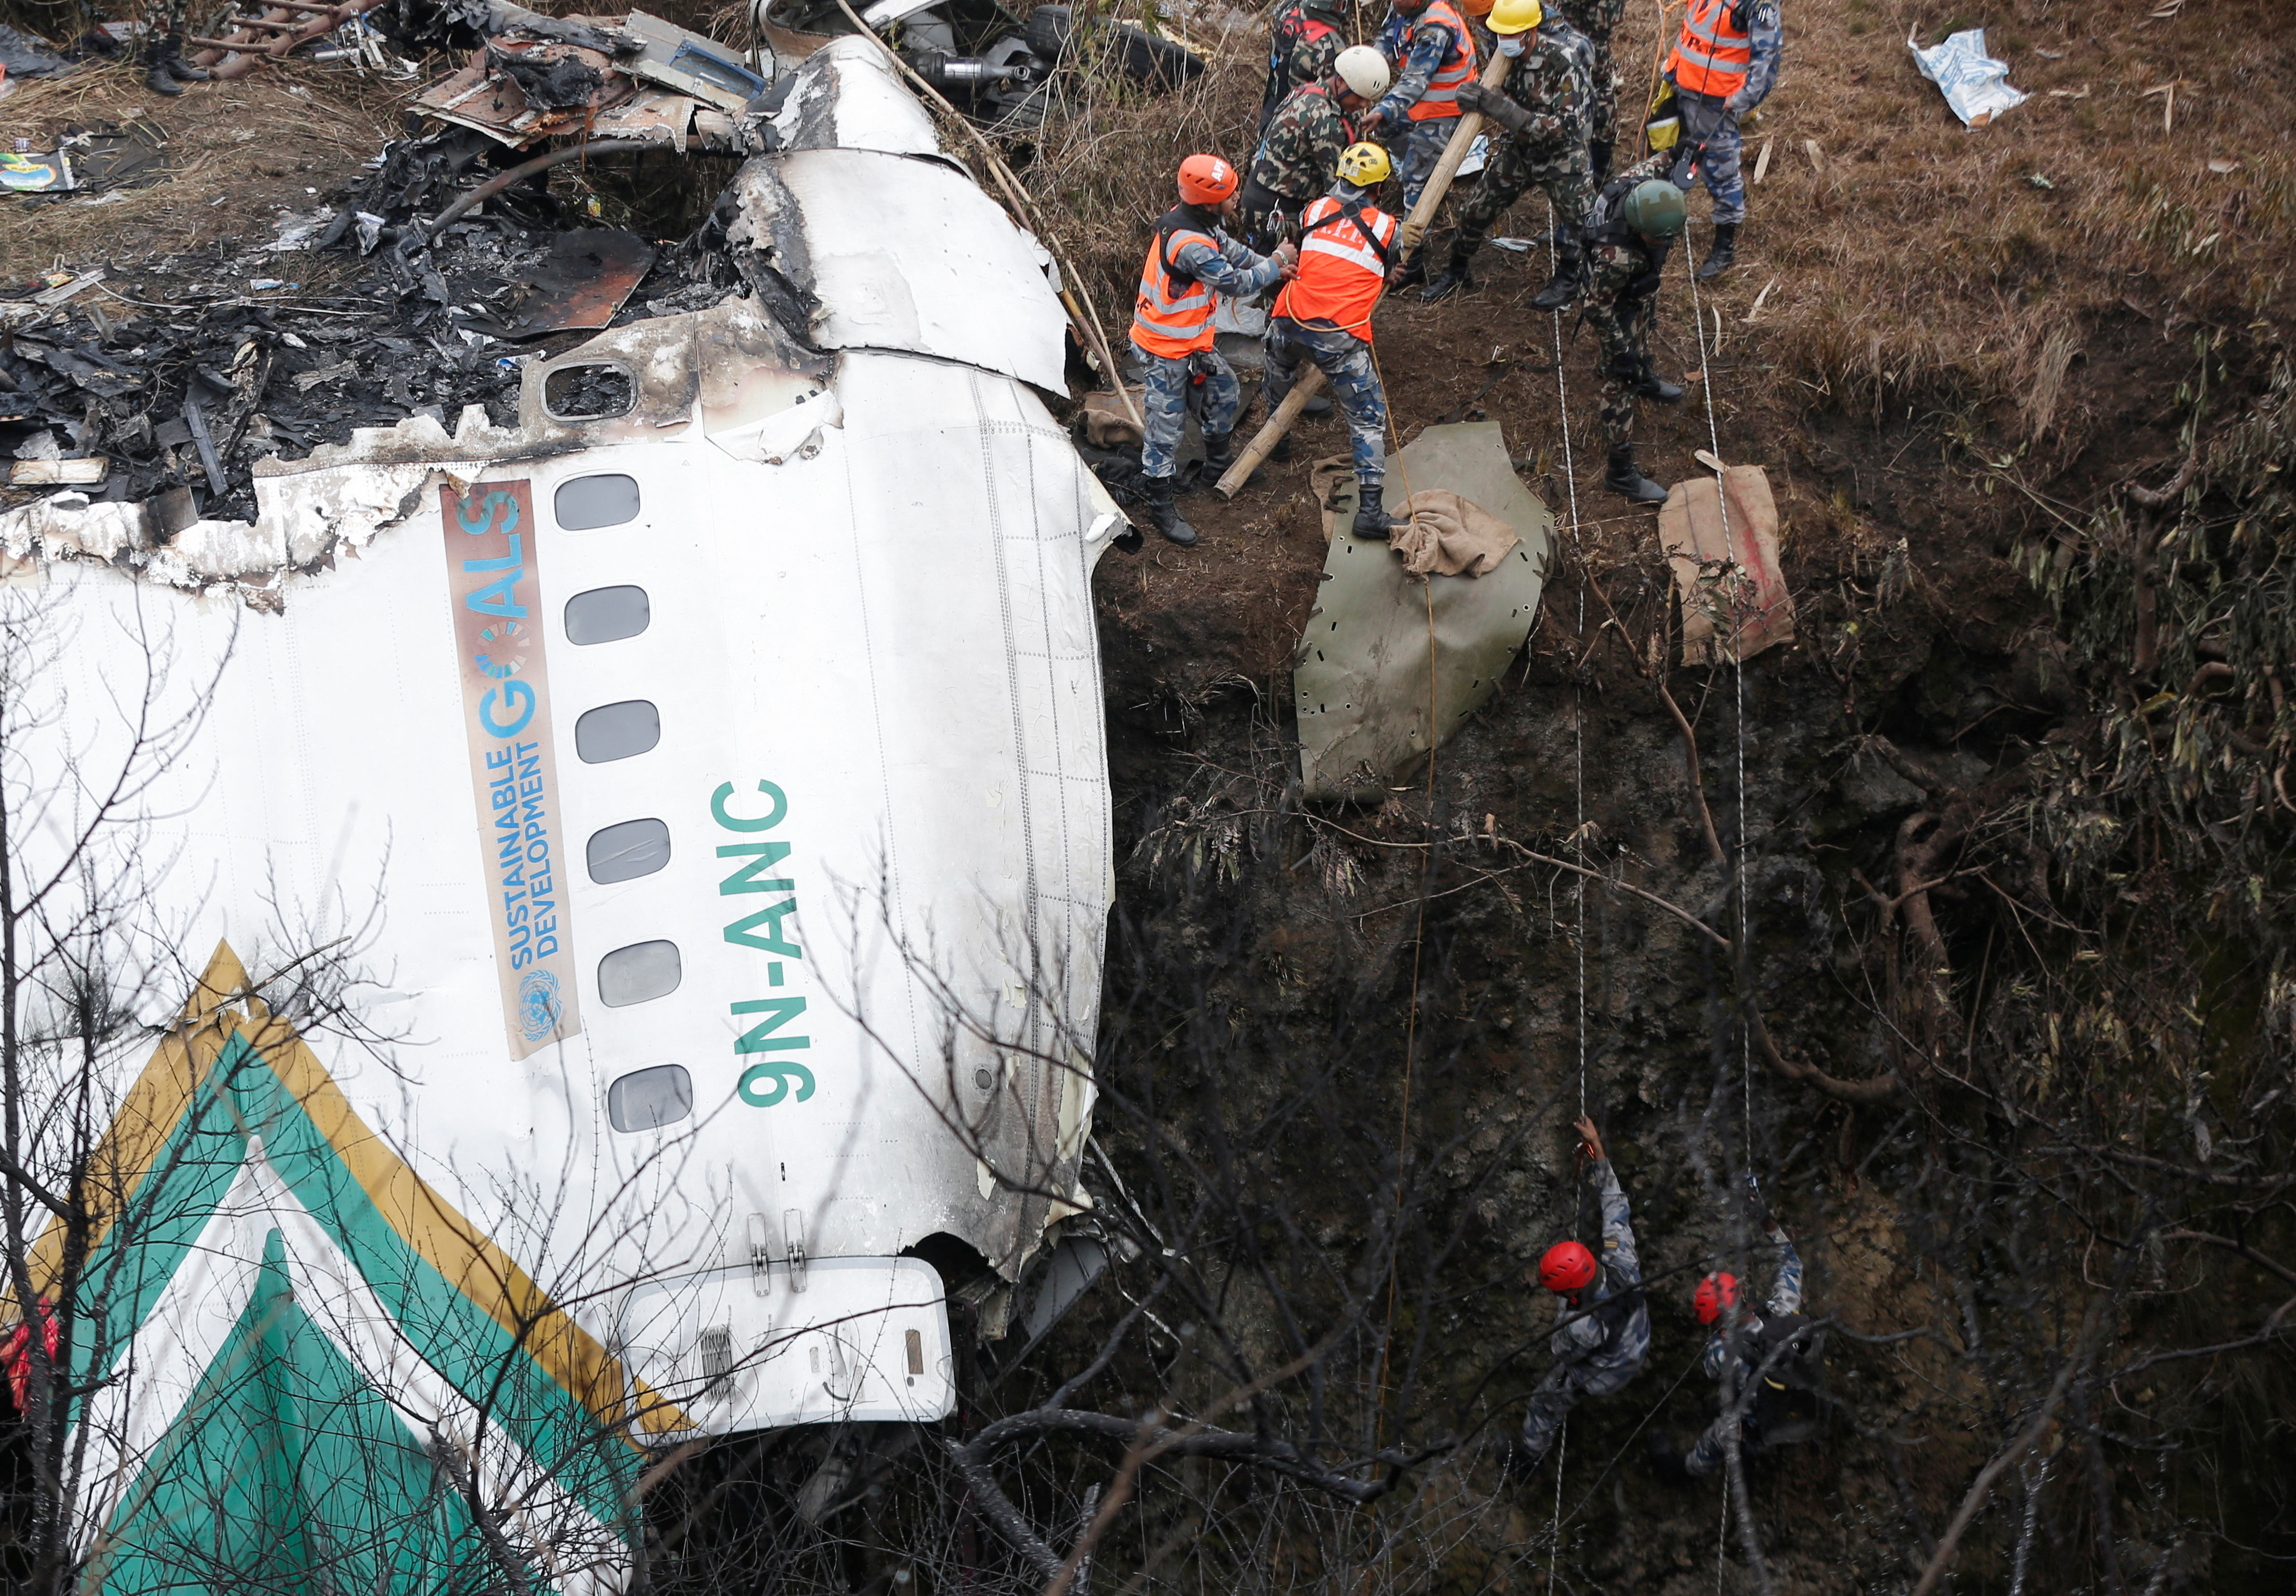 Rescuers search for last passenger missing in Nepal plane crash 